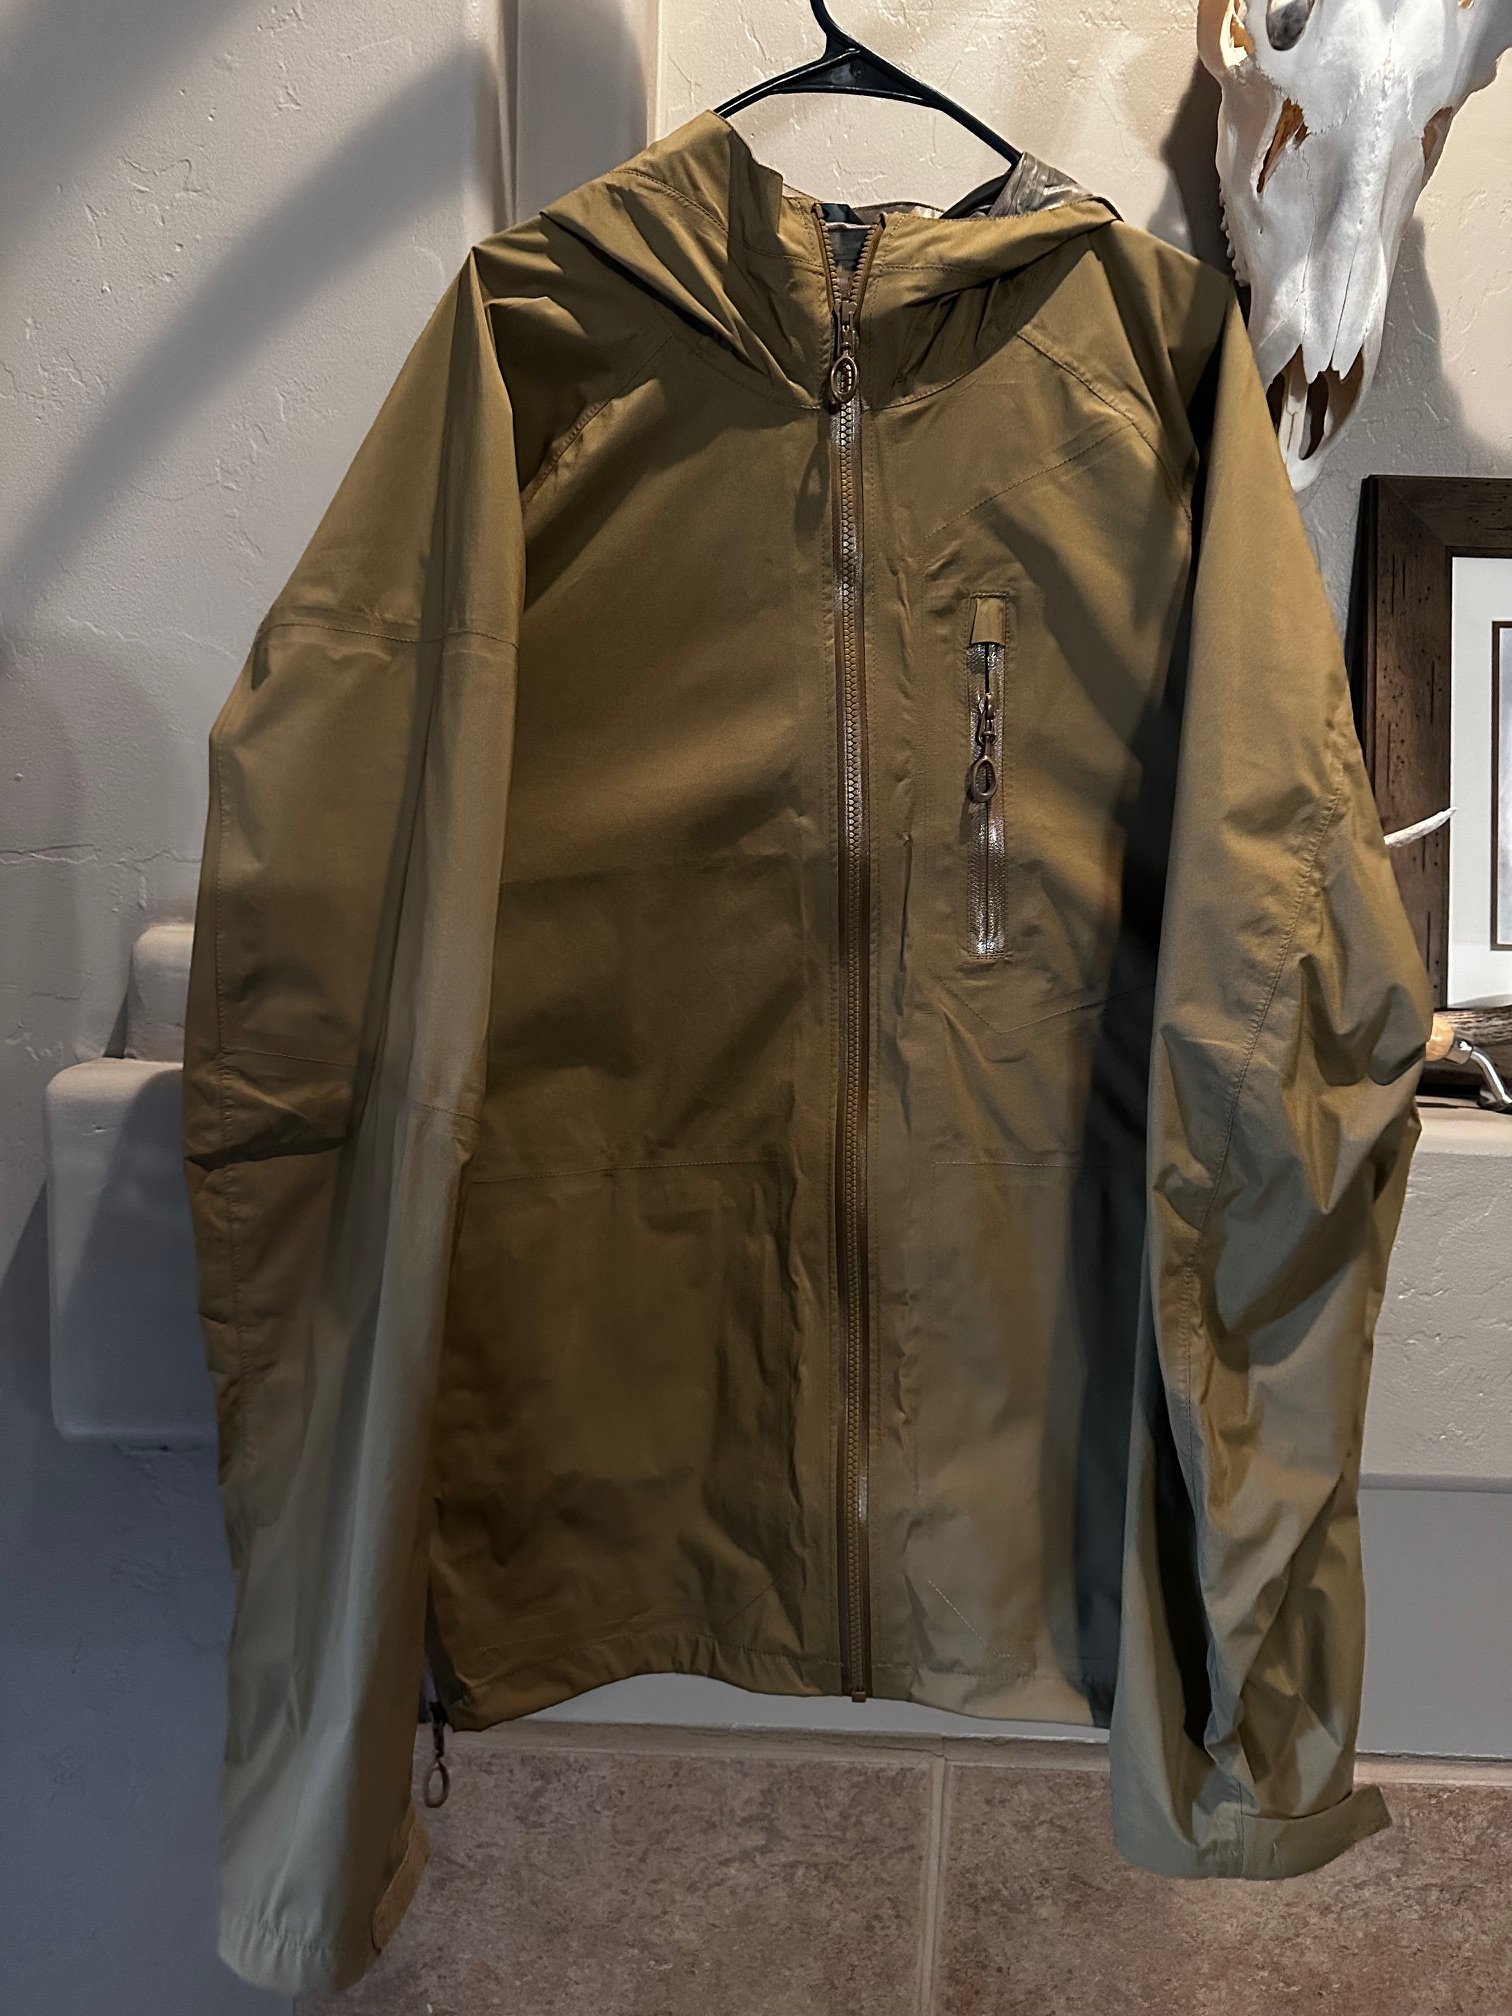 SOLD - Beyond Clothing Rain Jacket (A-6 Coyote Brown) - Made in the USA ...